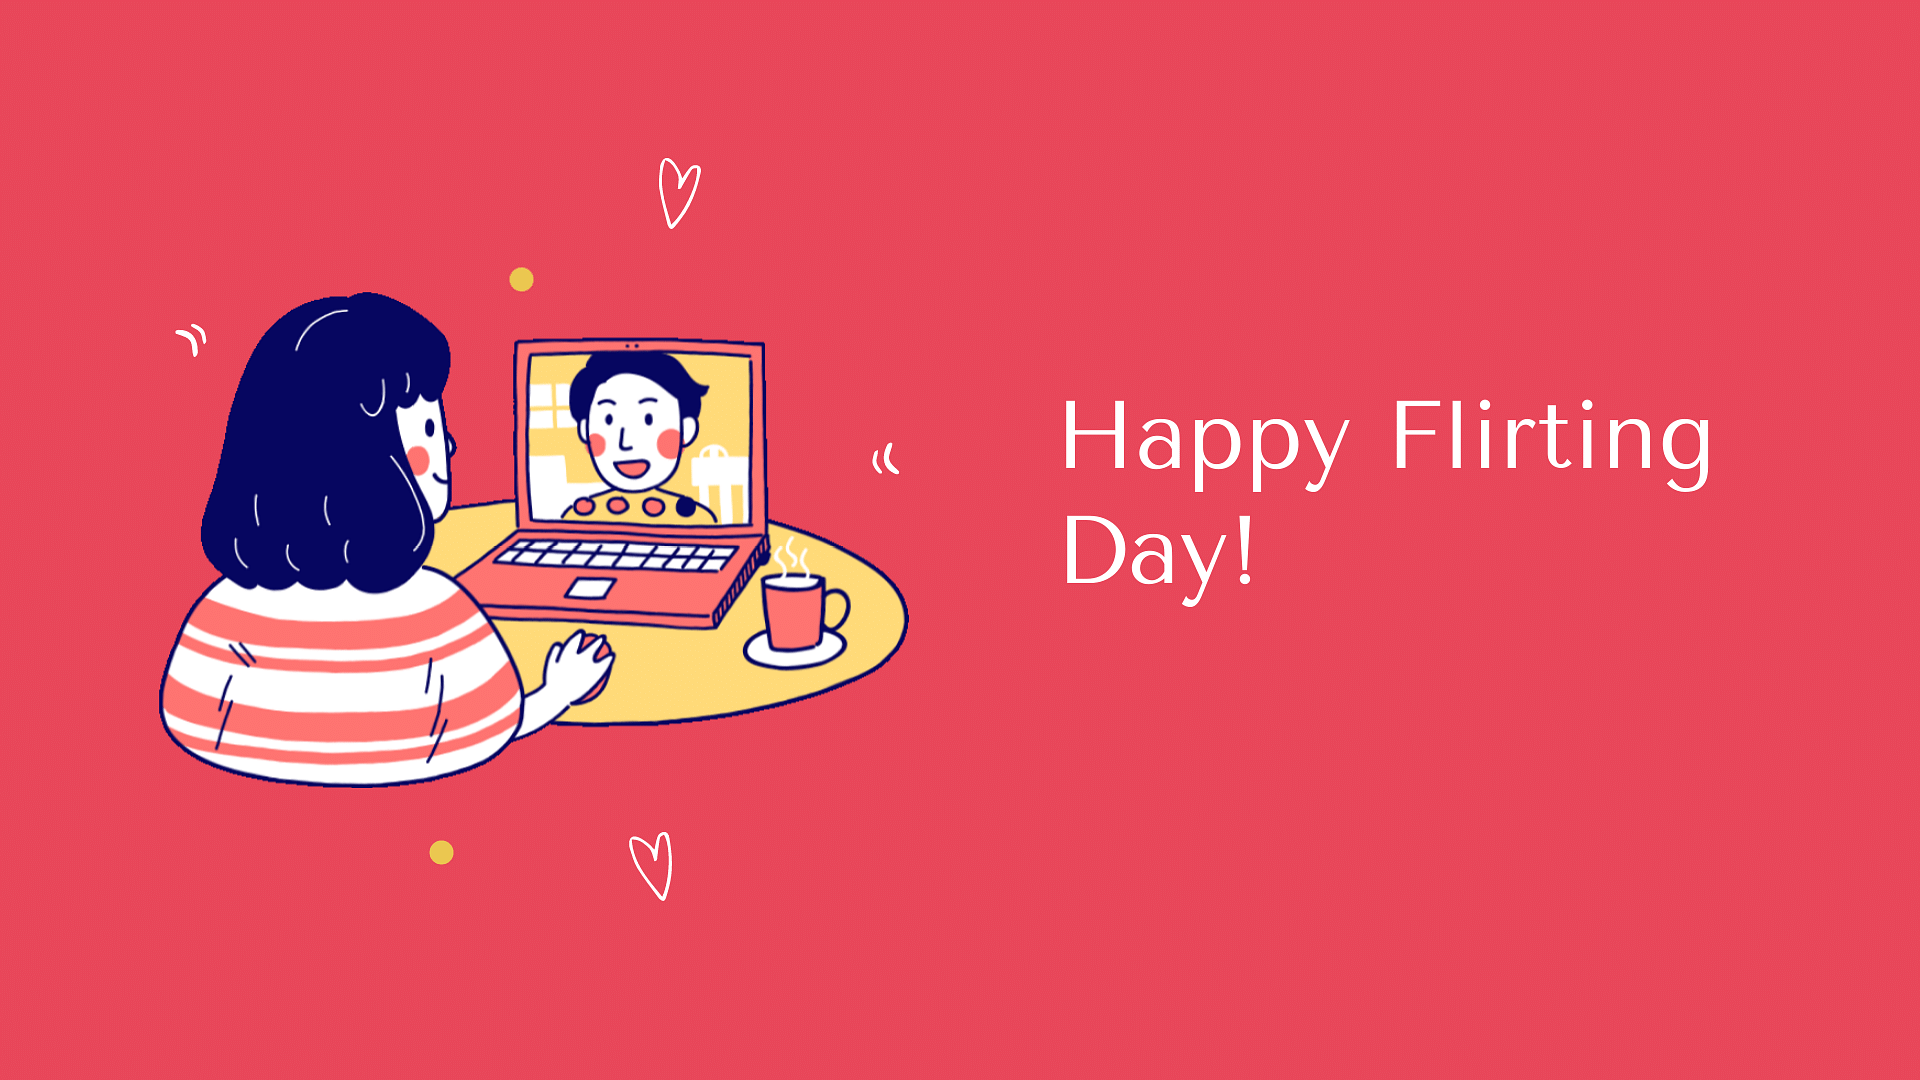 Happy Flirting Day 2020 Wishes WhatsApp Messages Facebook Quotes GIF  Images HD Wallpapers to Send Your Crush During AntiValentine Week    LatestLY